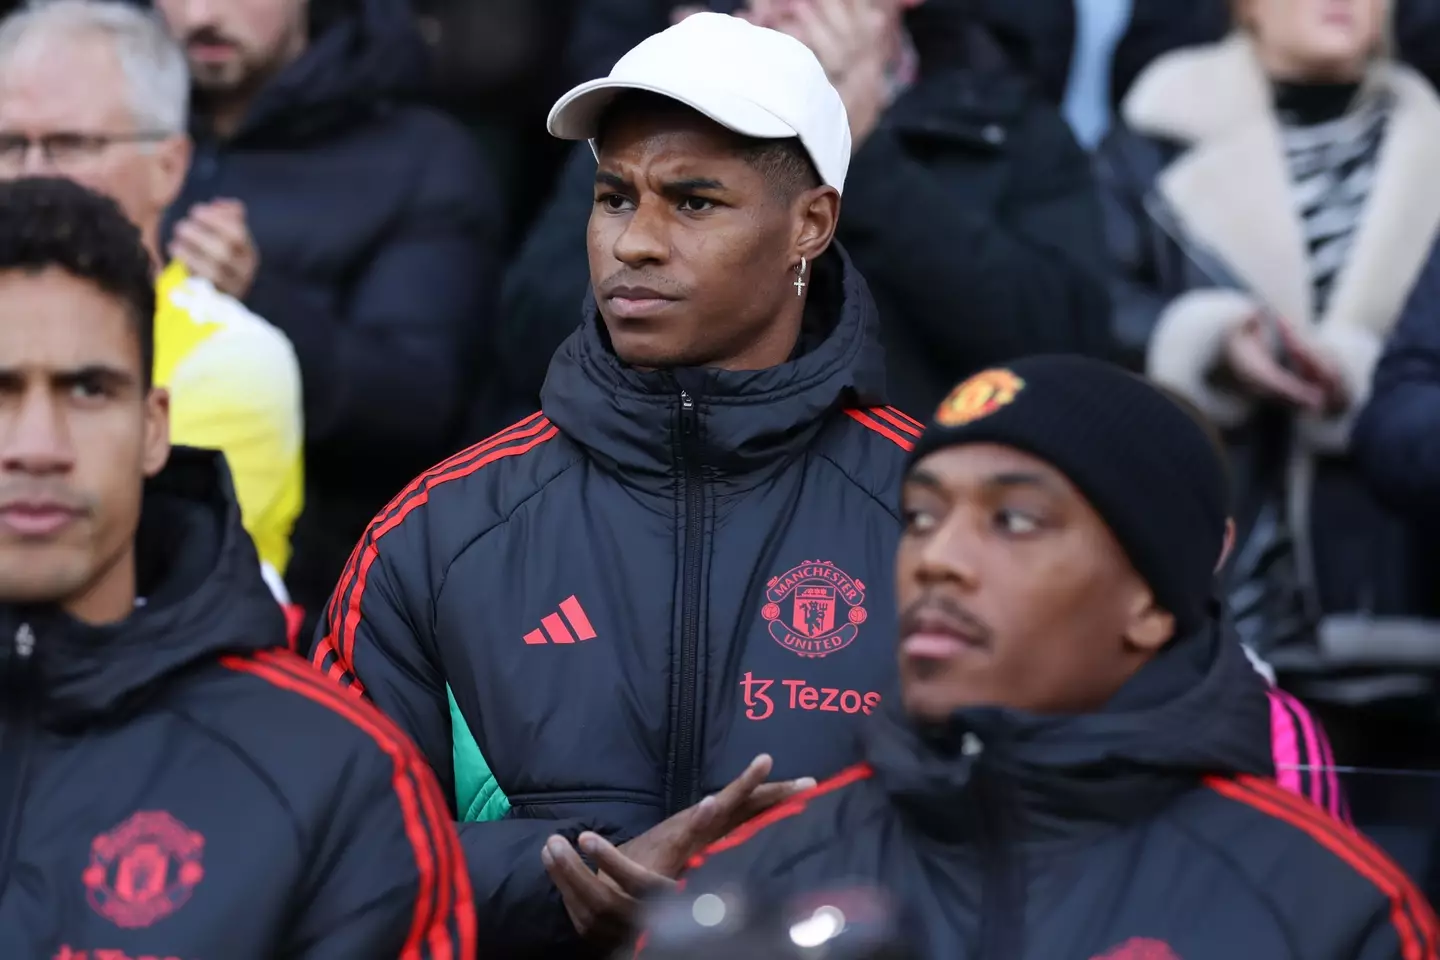 United will have Marcus Rashford back after he sat out the Fulham game. (Image